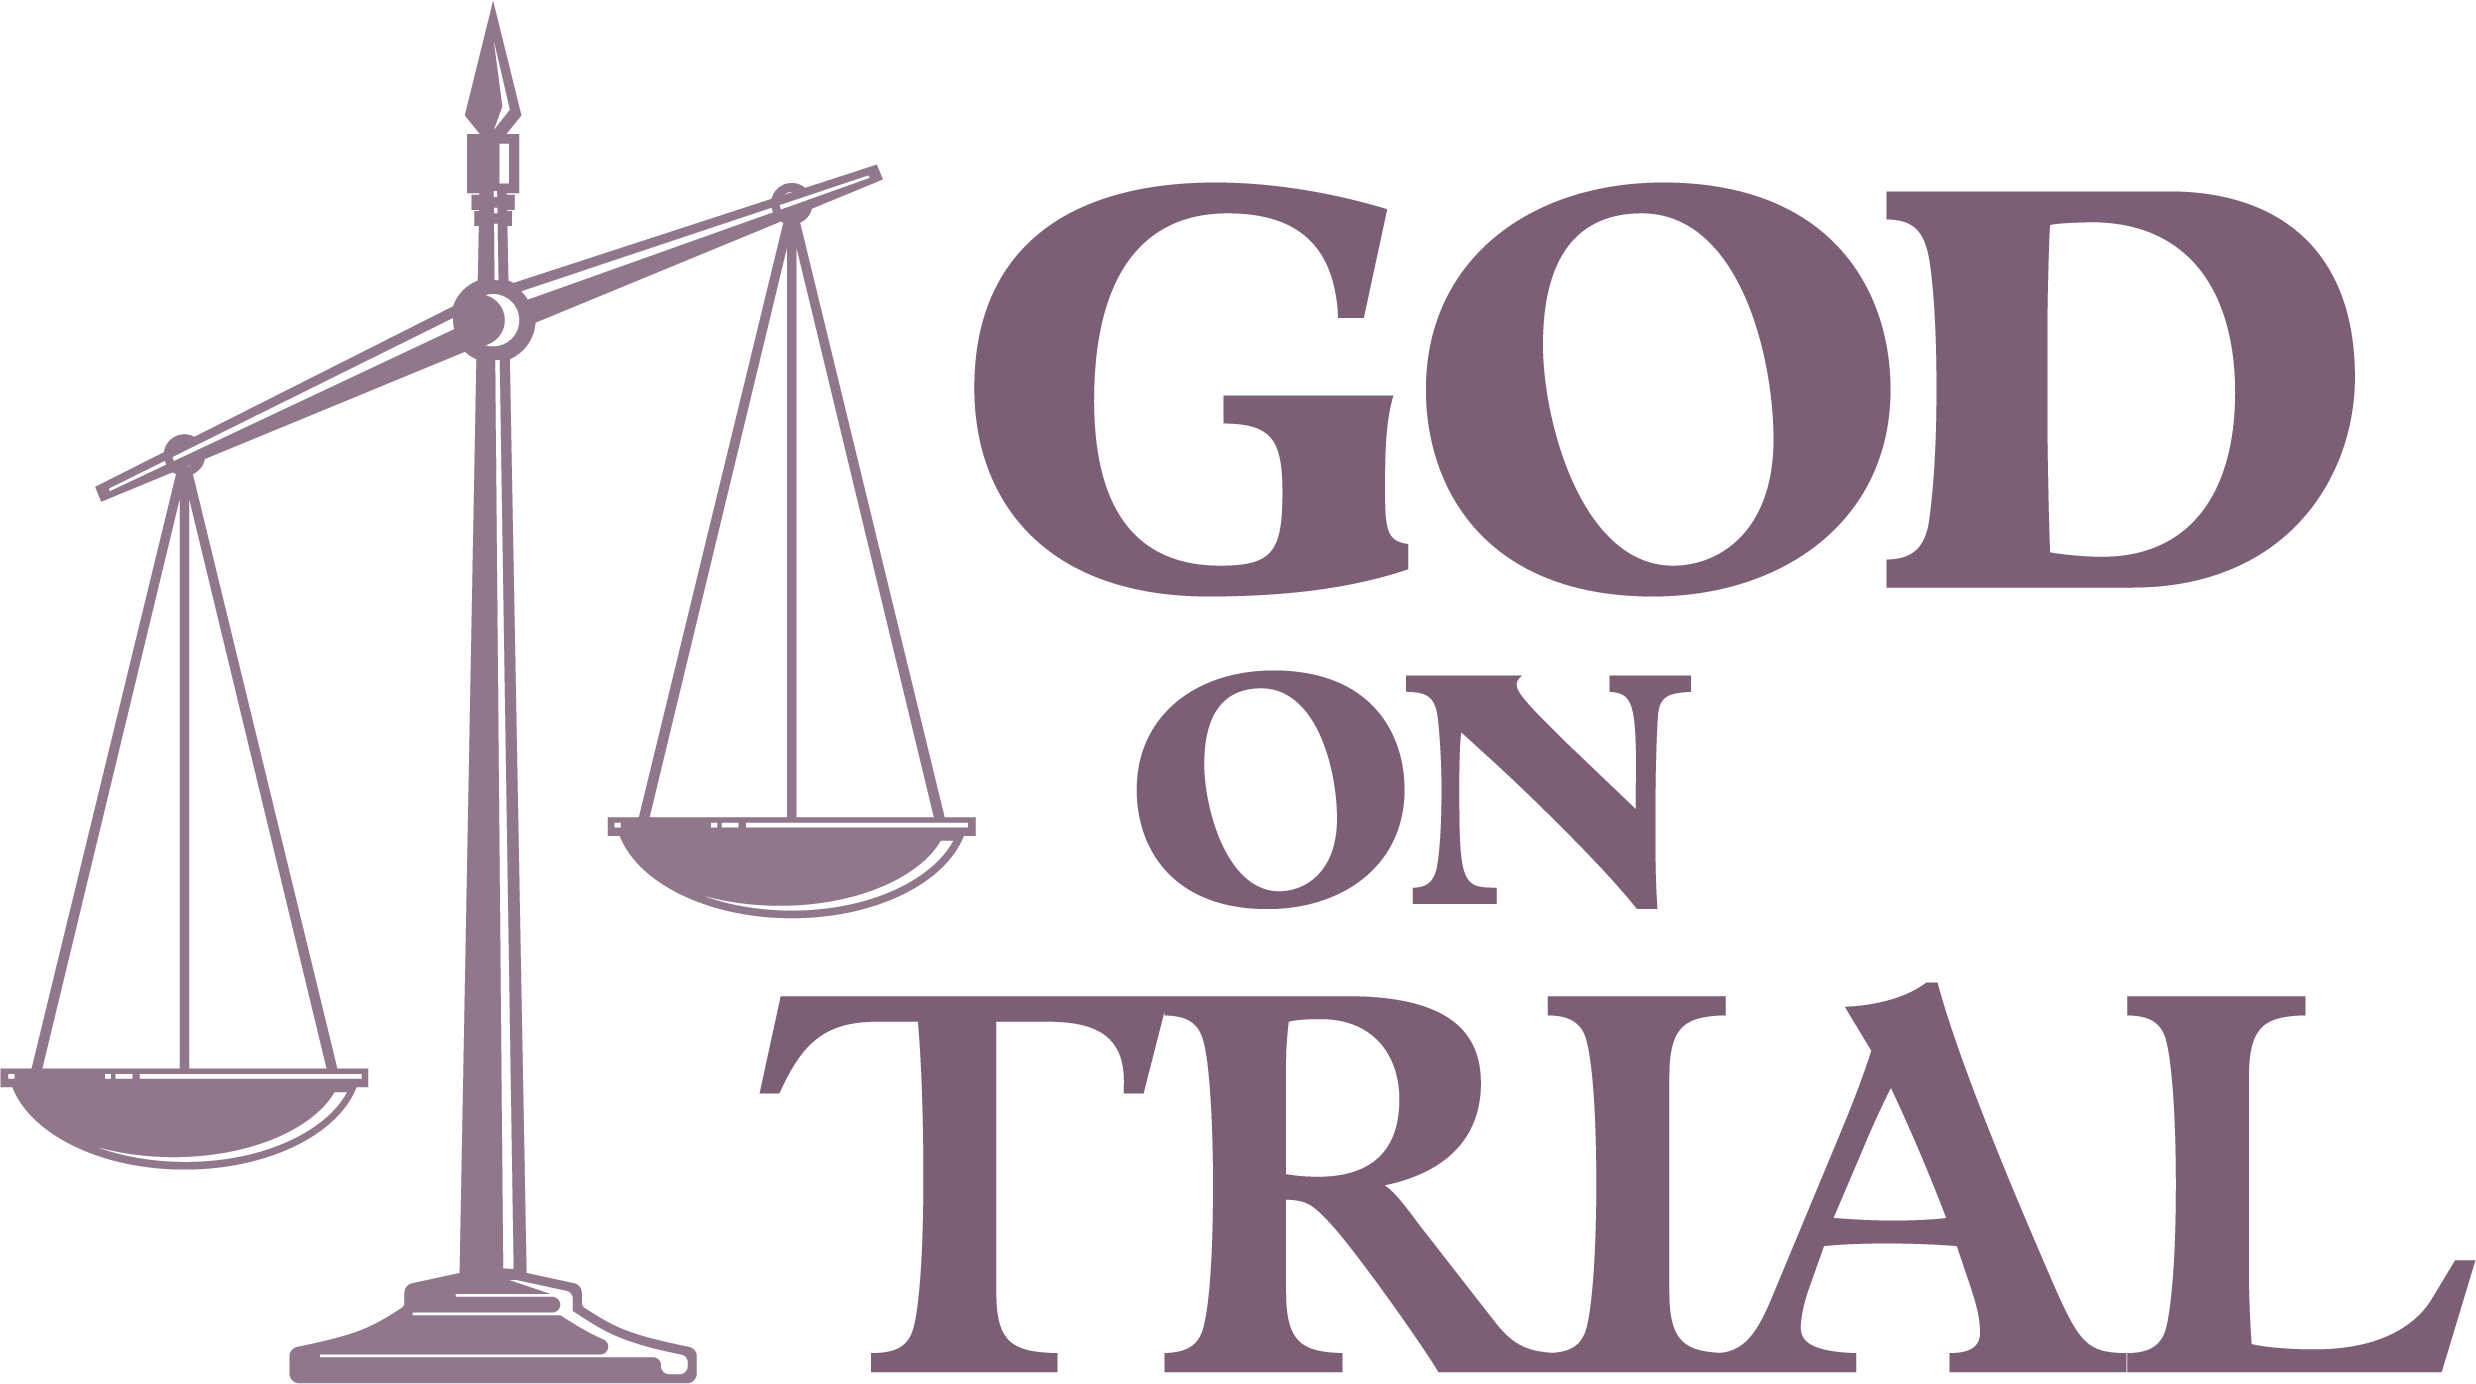 Image with a simple graphic of a scale tipped in one direction, as well as text that says "God on Trial".